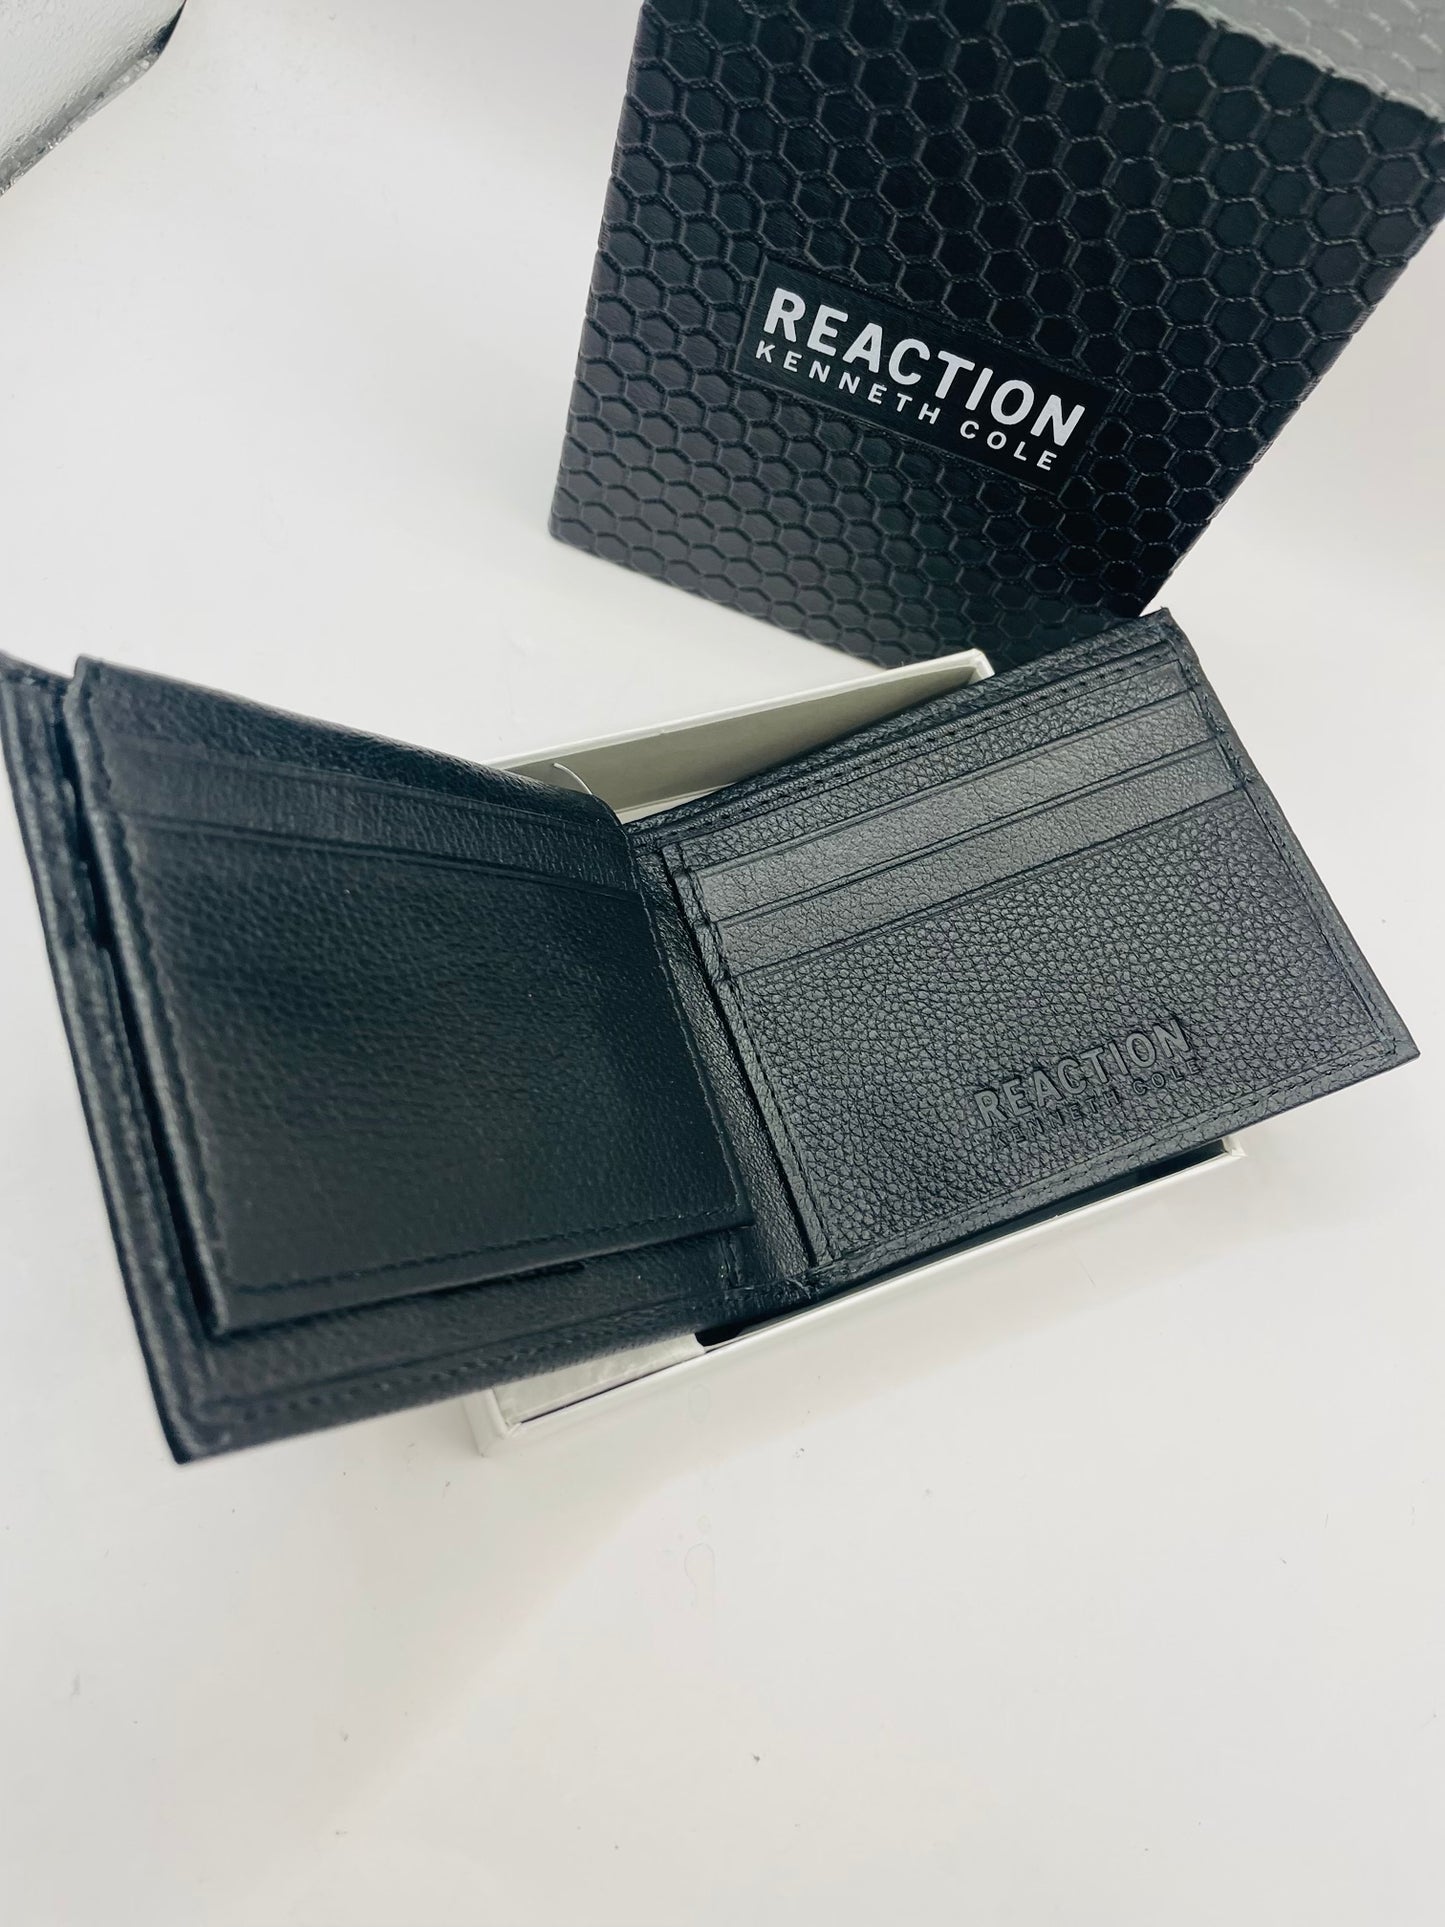 Kenneth Cole reaction